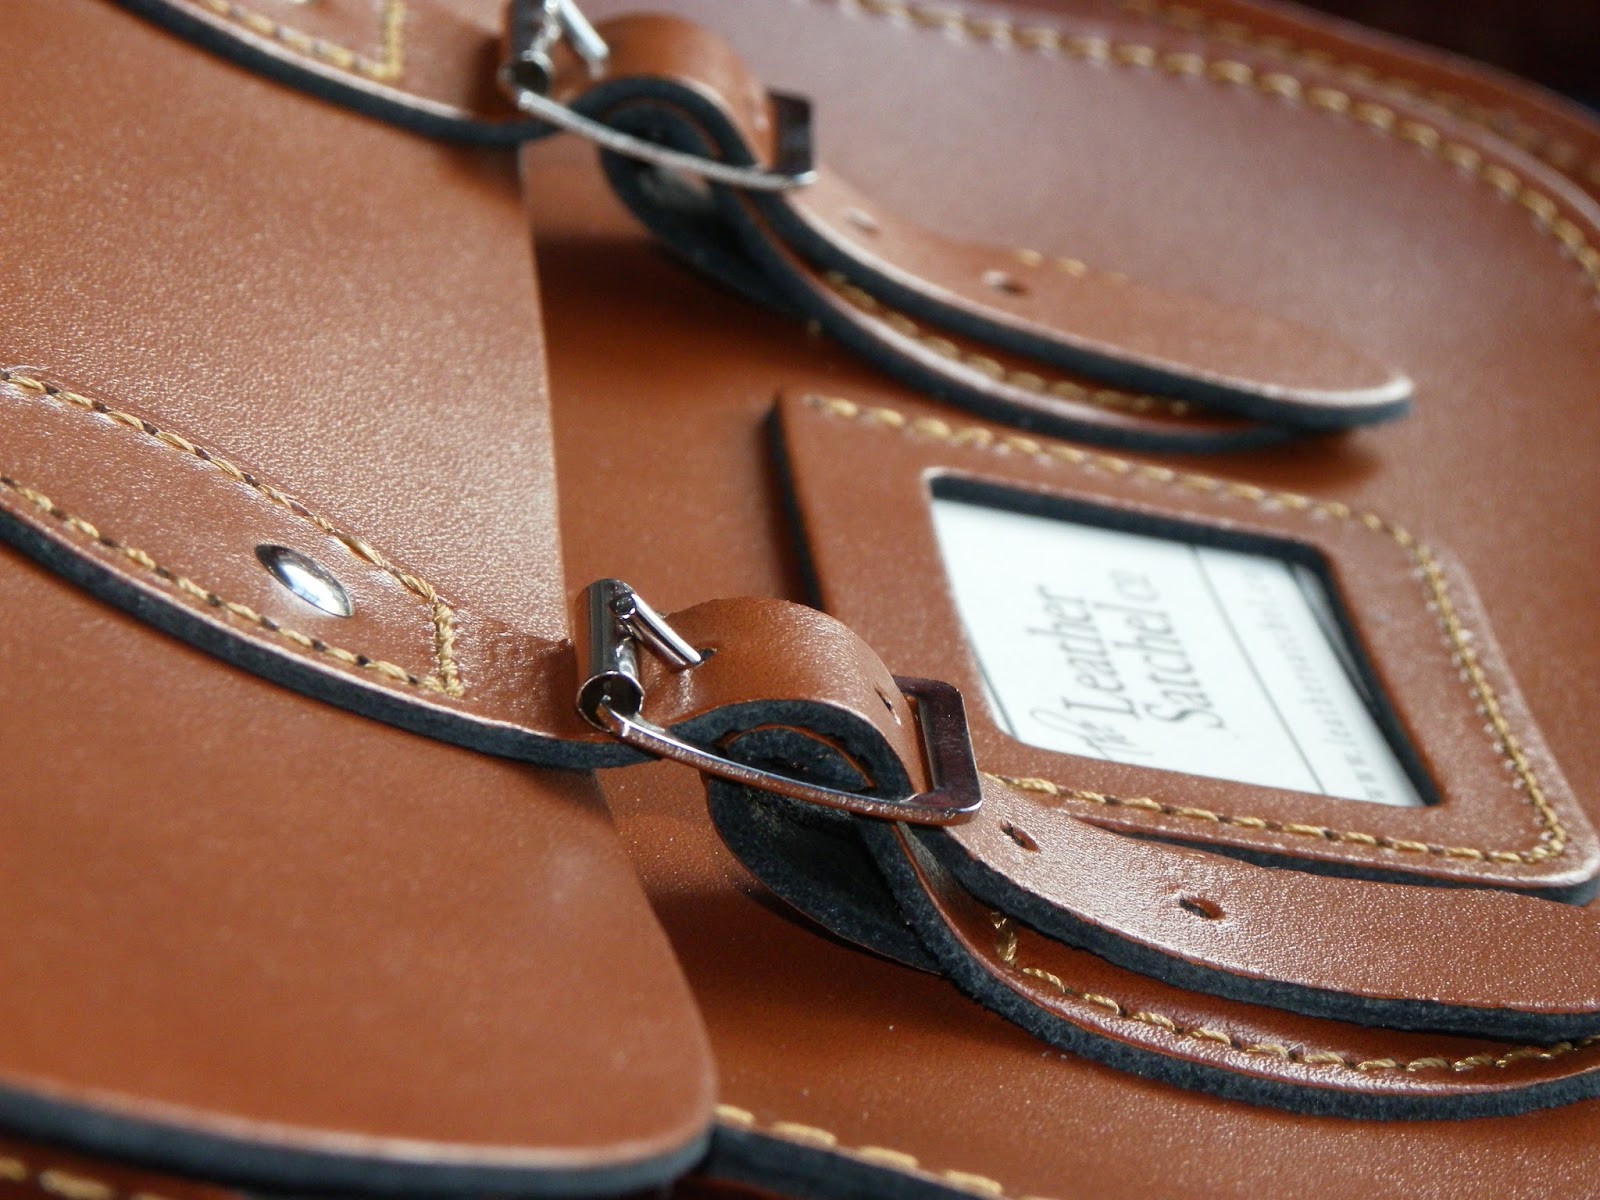 Lavender shines: The Leather Satchel Company Review